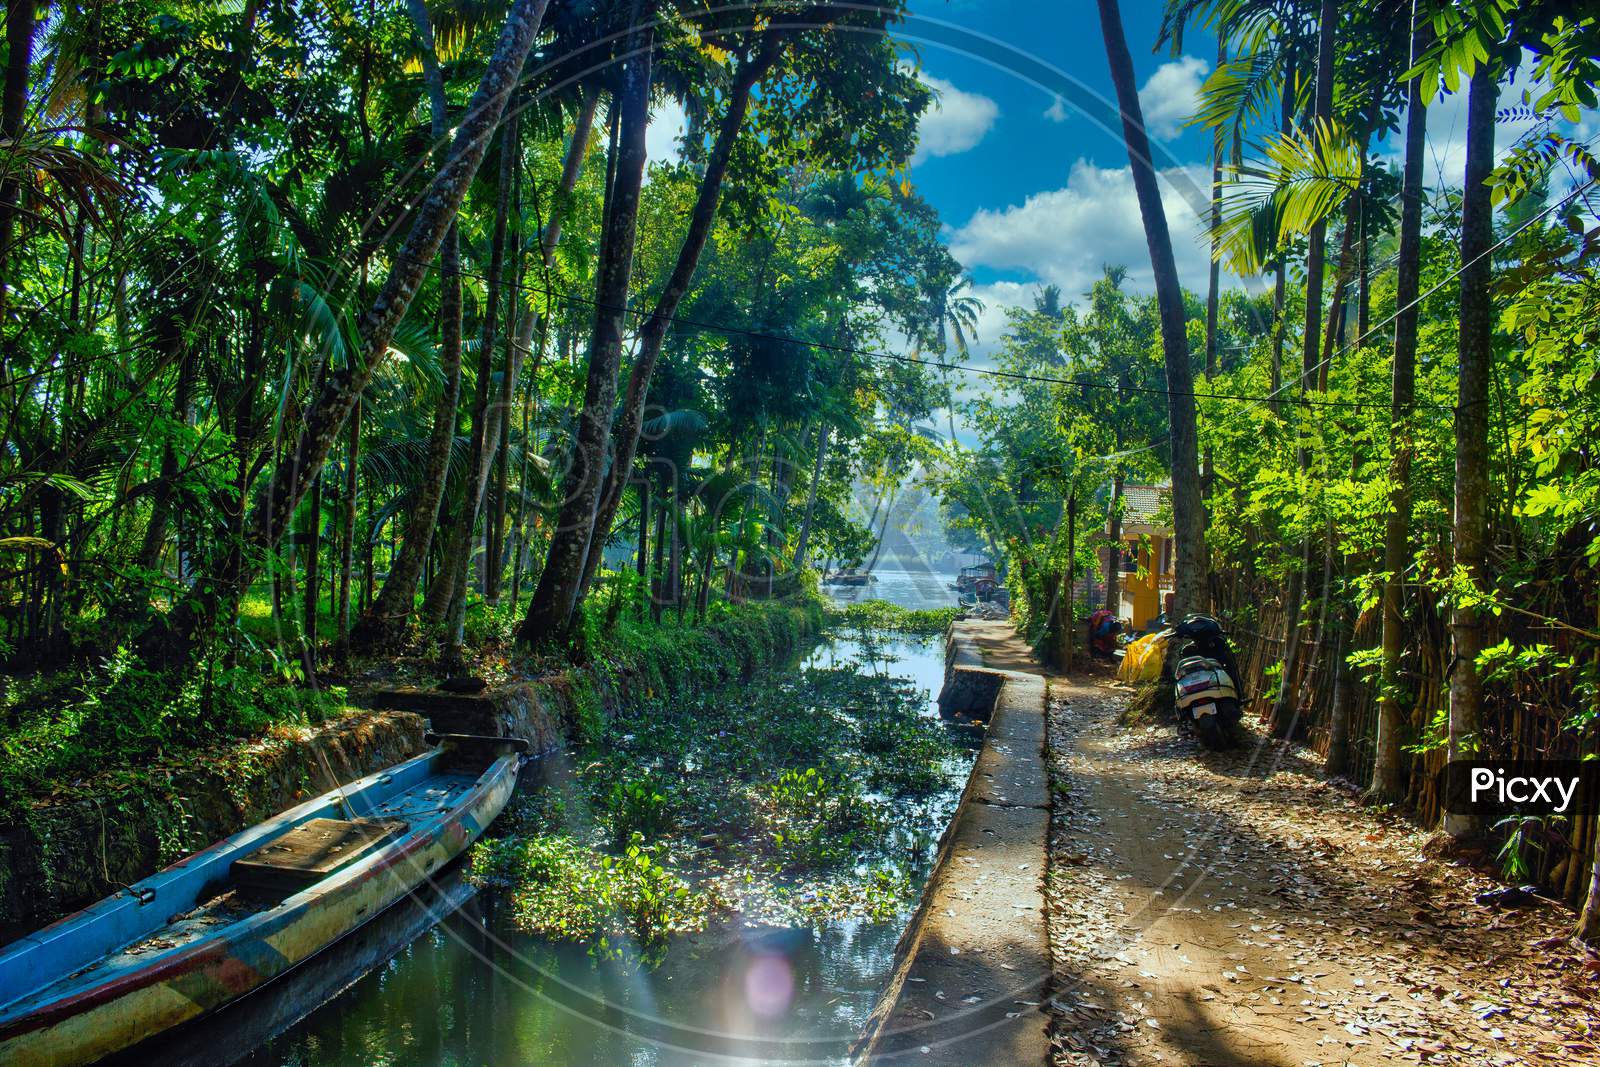 A Scenic View Of Boat In Backwaters Situated In Allepey Town Located In Kerala State